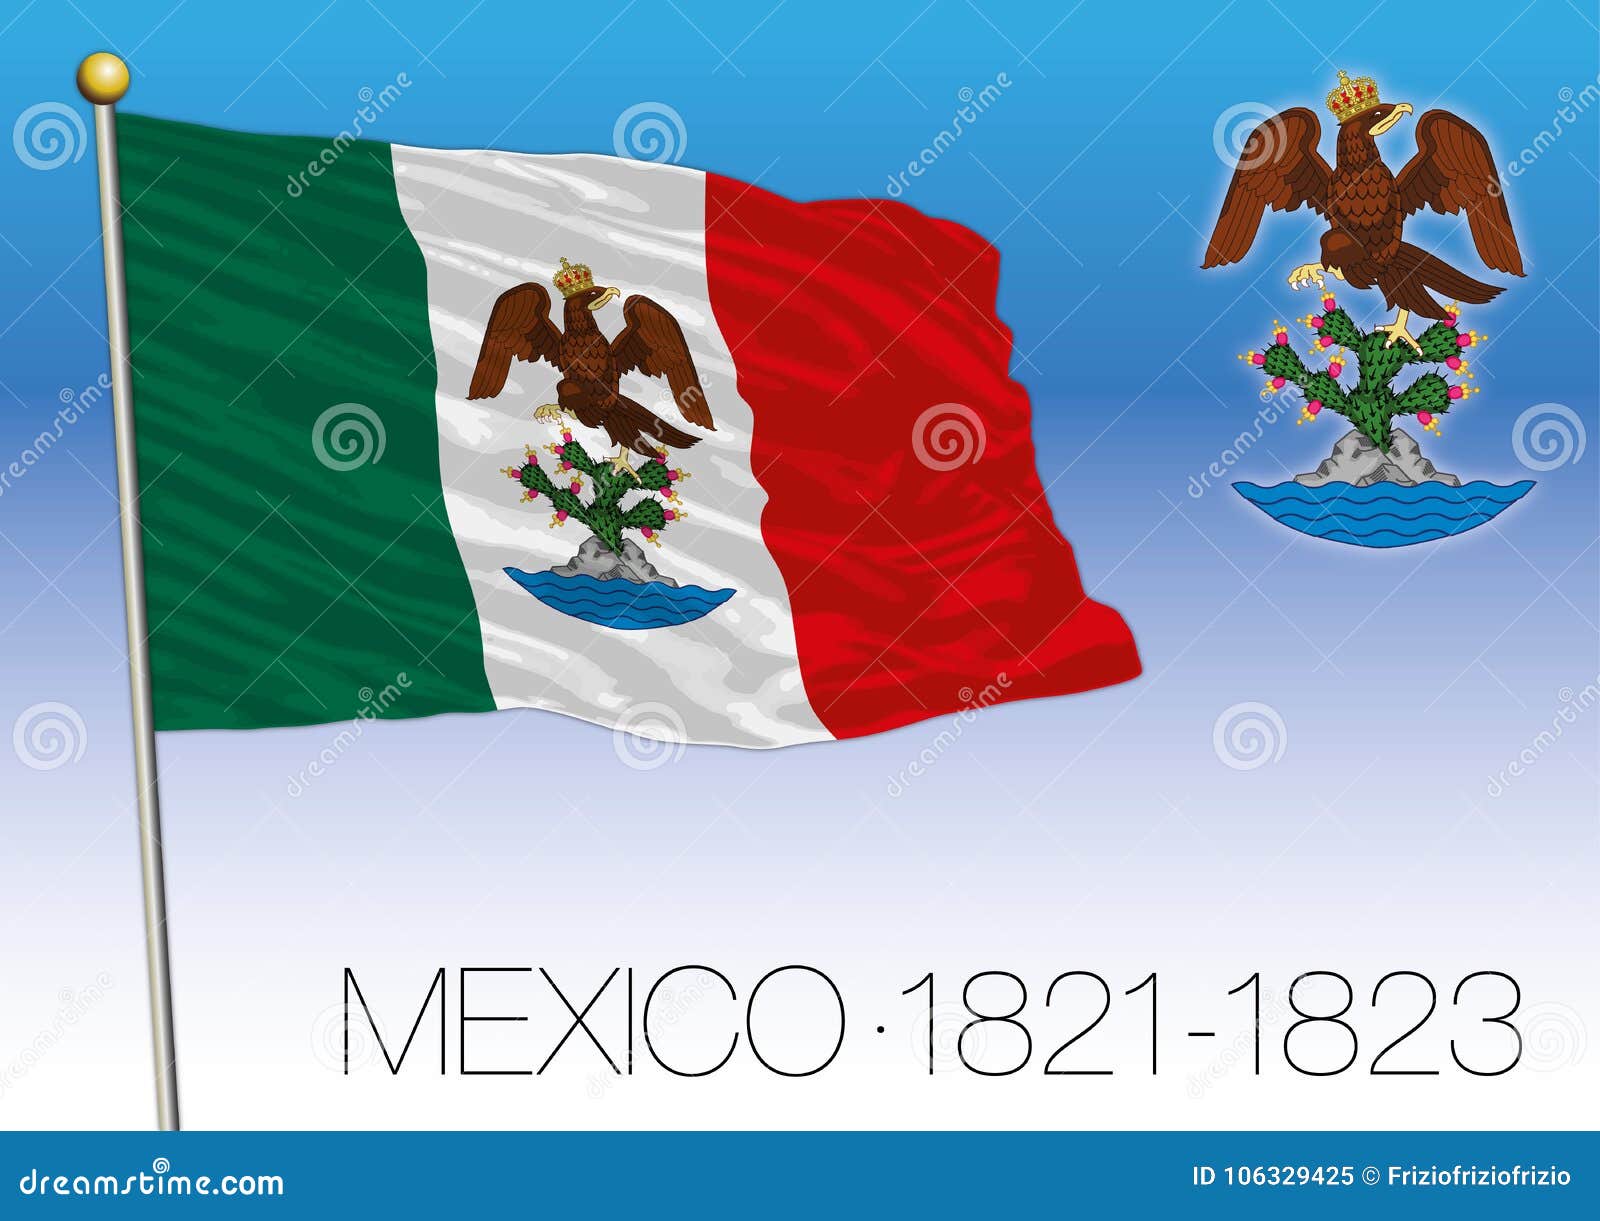 First Flag of Mexico, Historical Mexican Flags